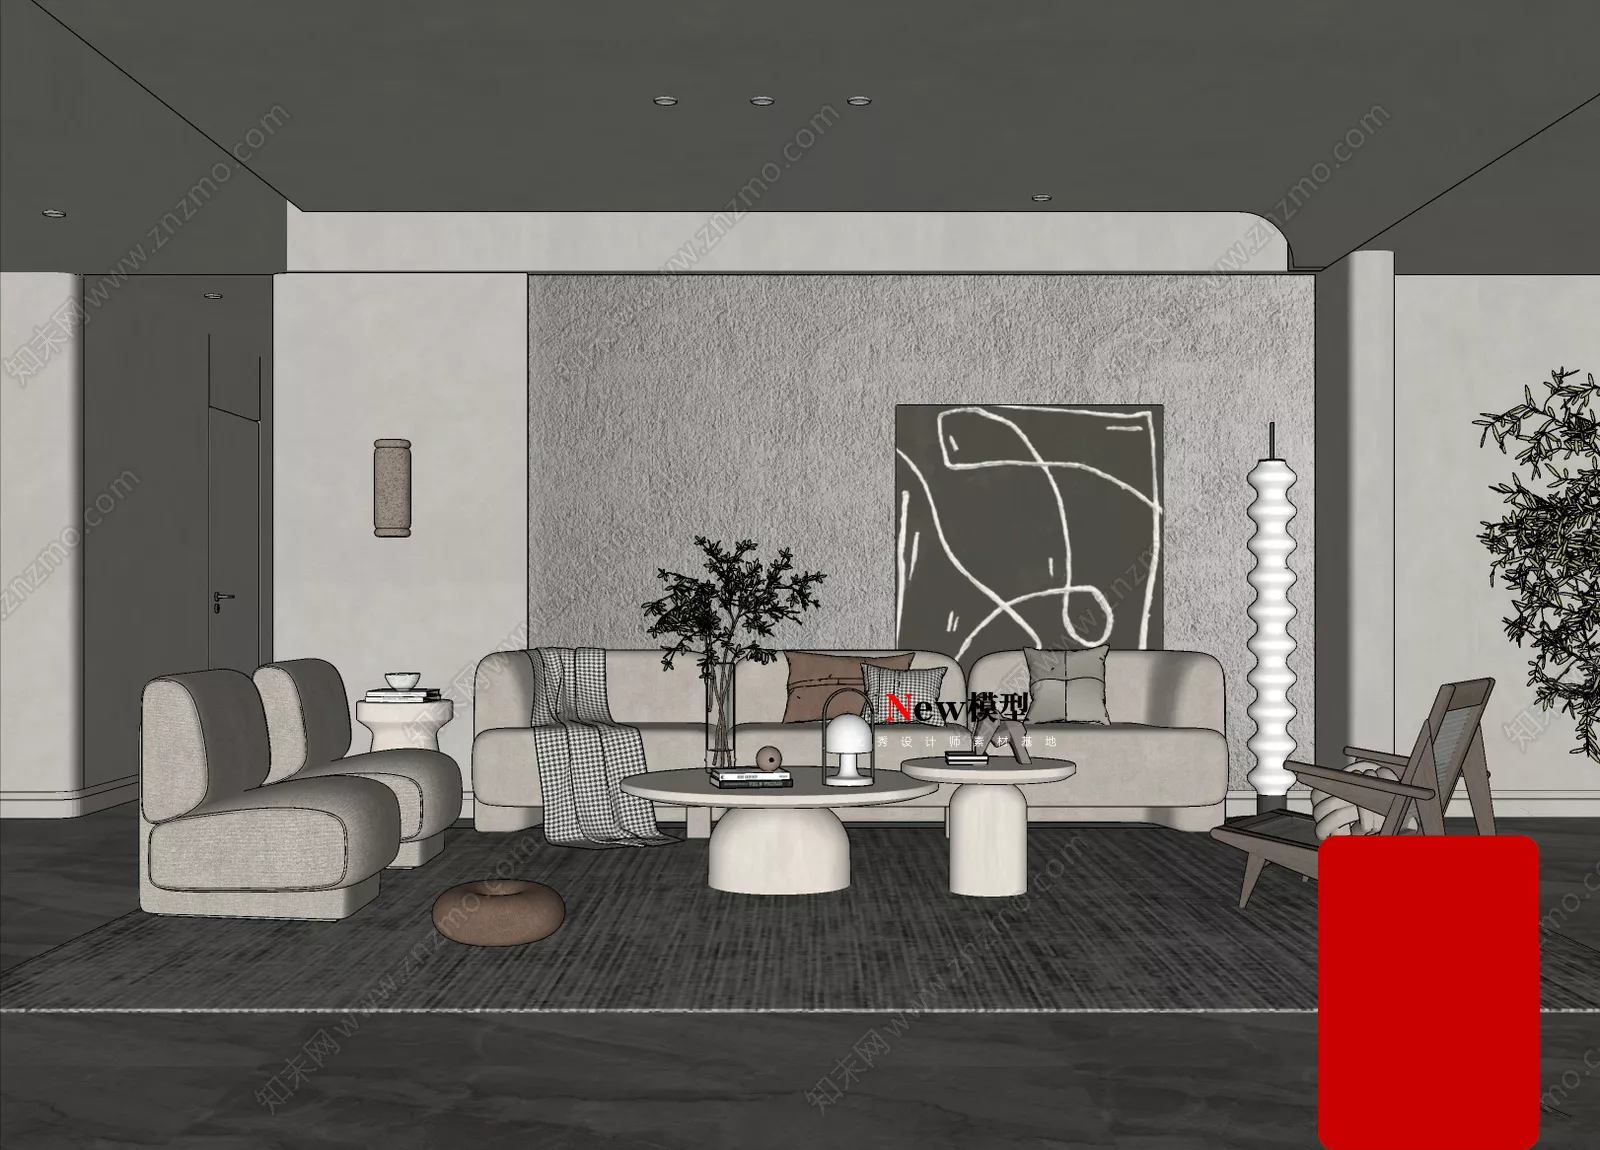 WABI SABI INTERIOR COLLECTION - SKETCHUP 3D SCENE - VRAY OR ENSCAPE - ID17749